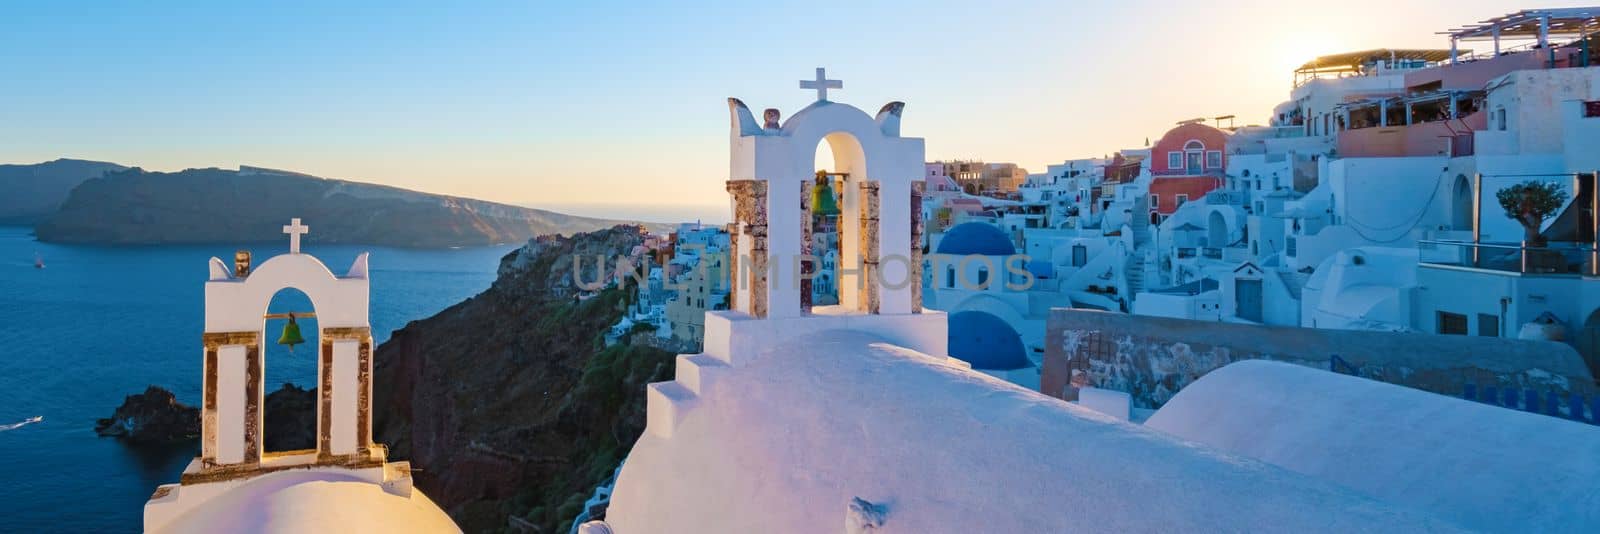 Oia Santorini Greece in the evening during sunset, traditional Greek village  by fokkebok